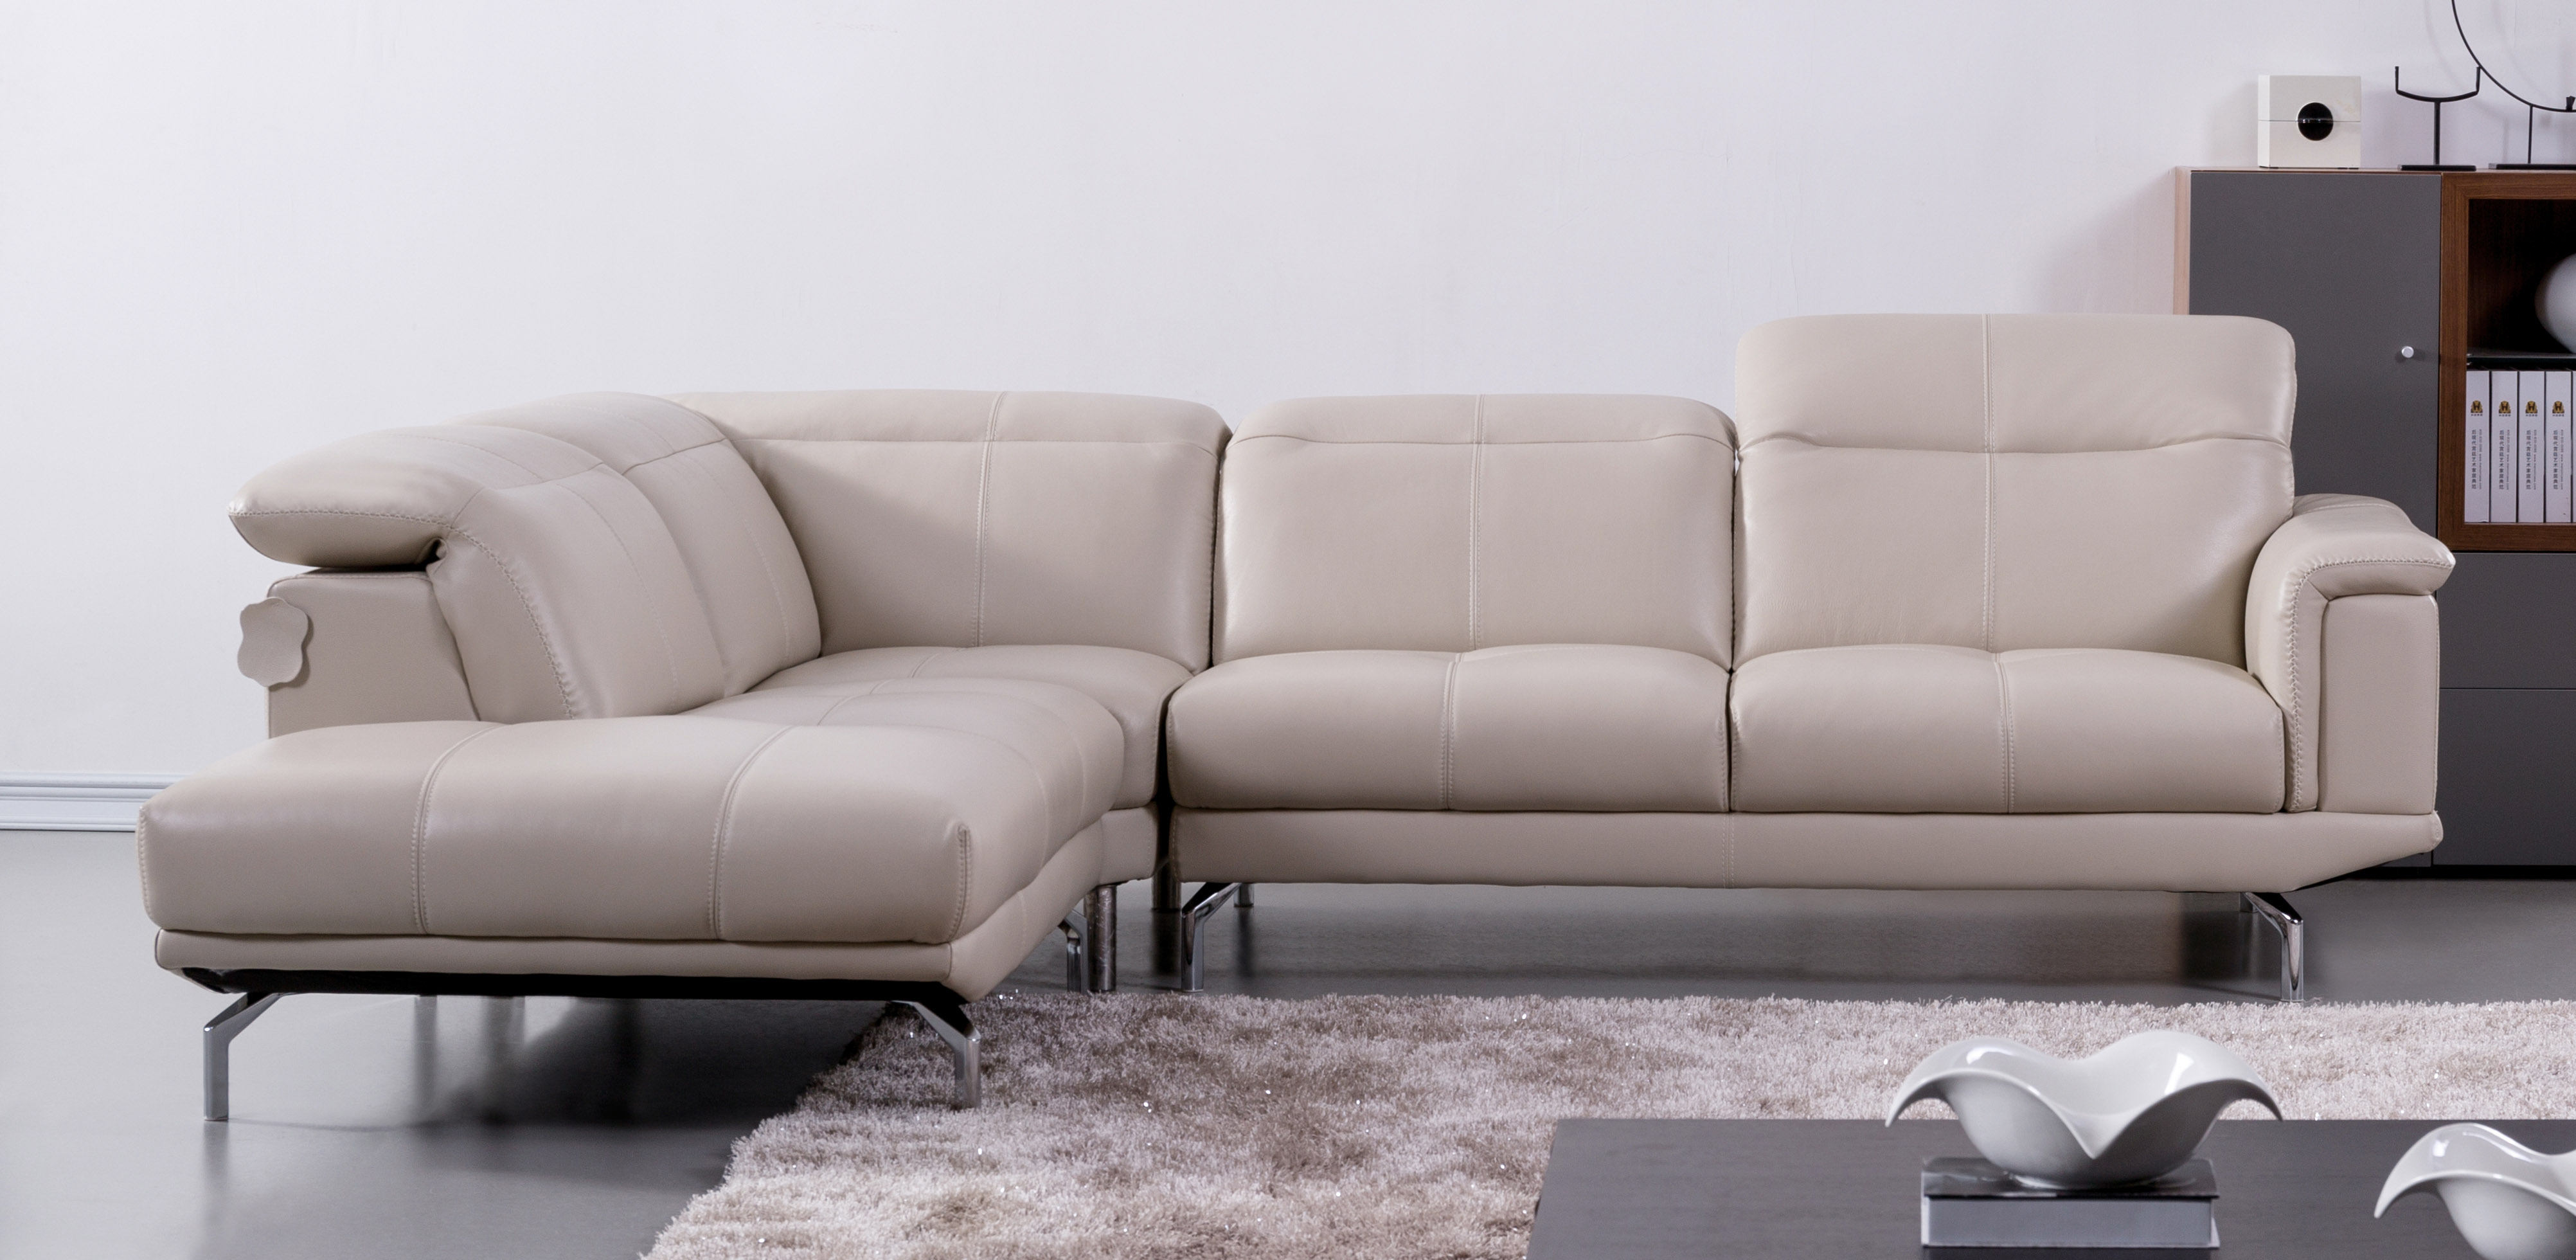 modern compact leather sectional sofa